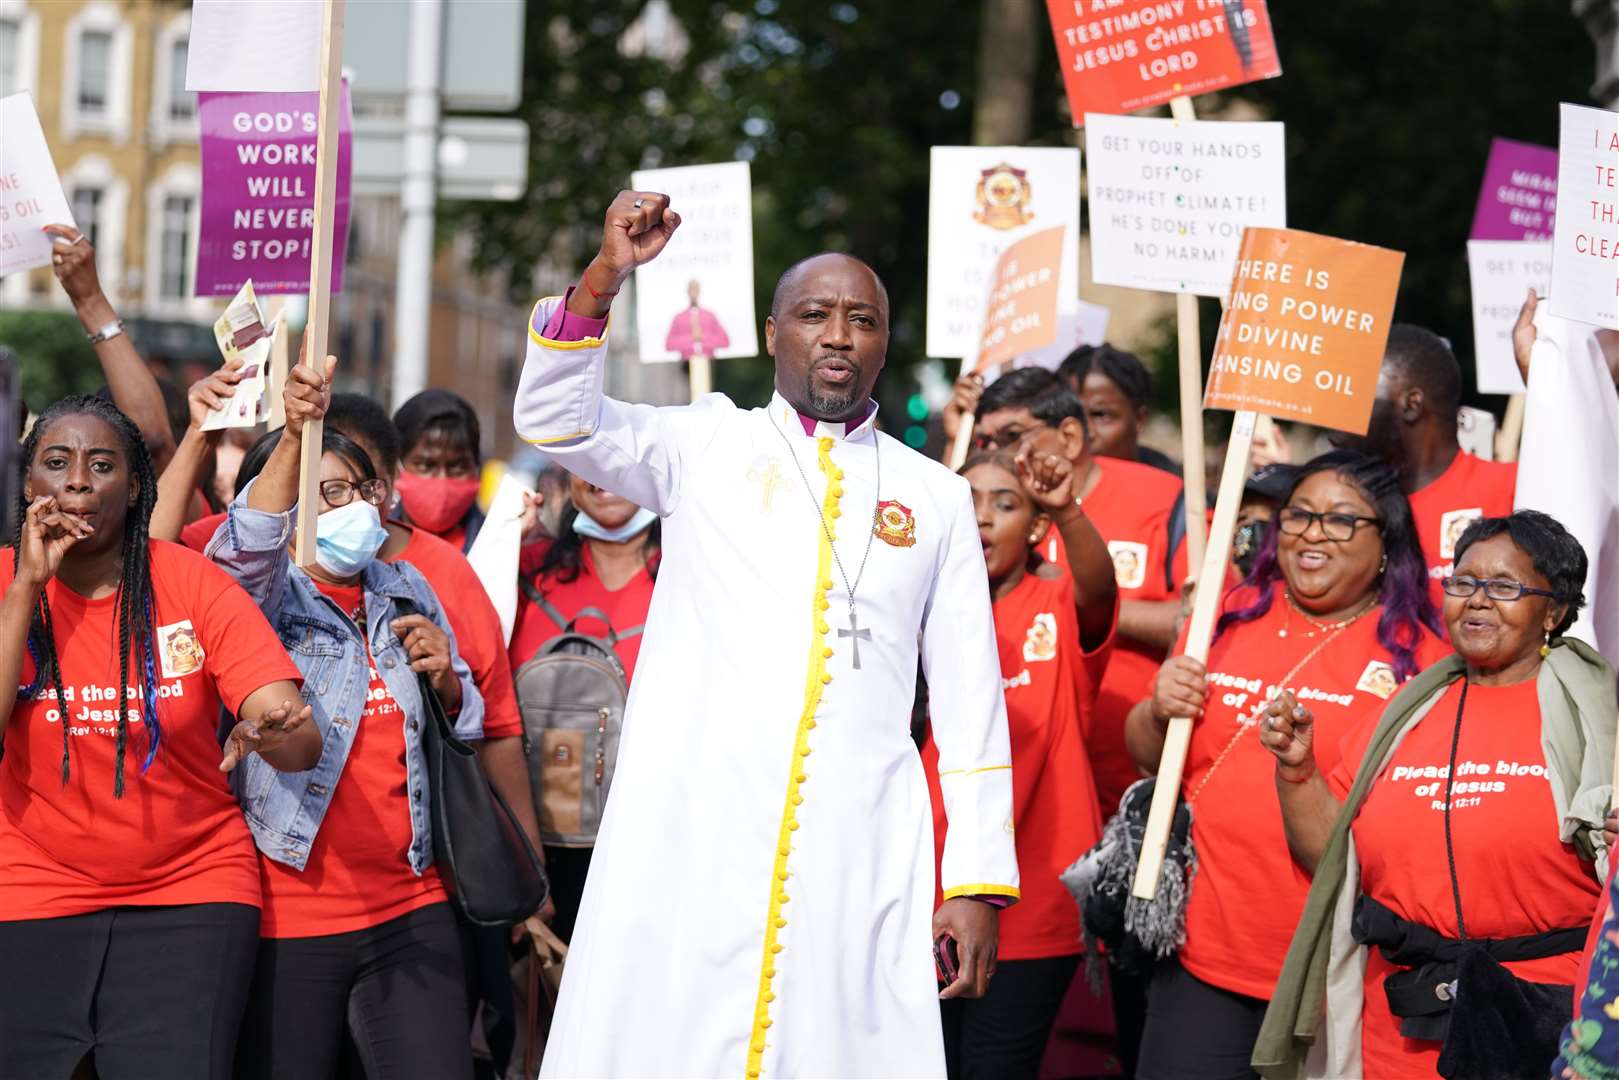 Bishop Climate Wiseman said he was inspired by a visitation from God telling him he is a prophet who can cure coronavirus (Kirsty O’Connor/PA)